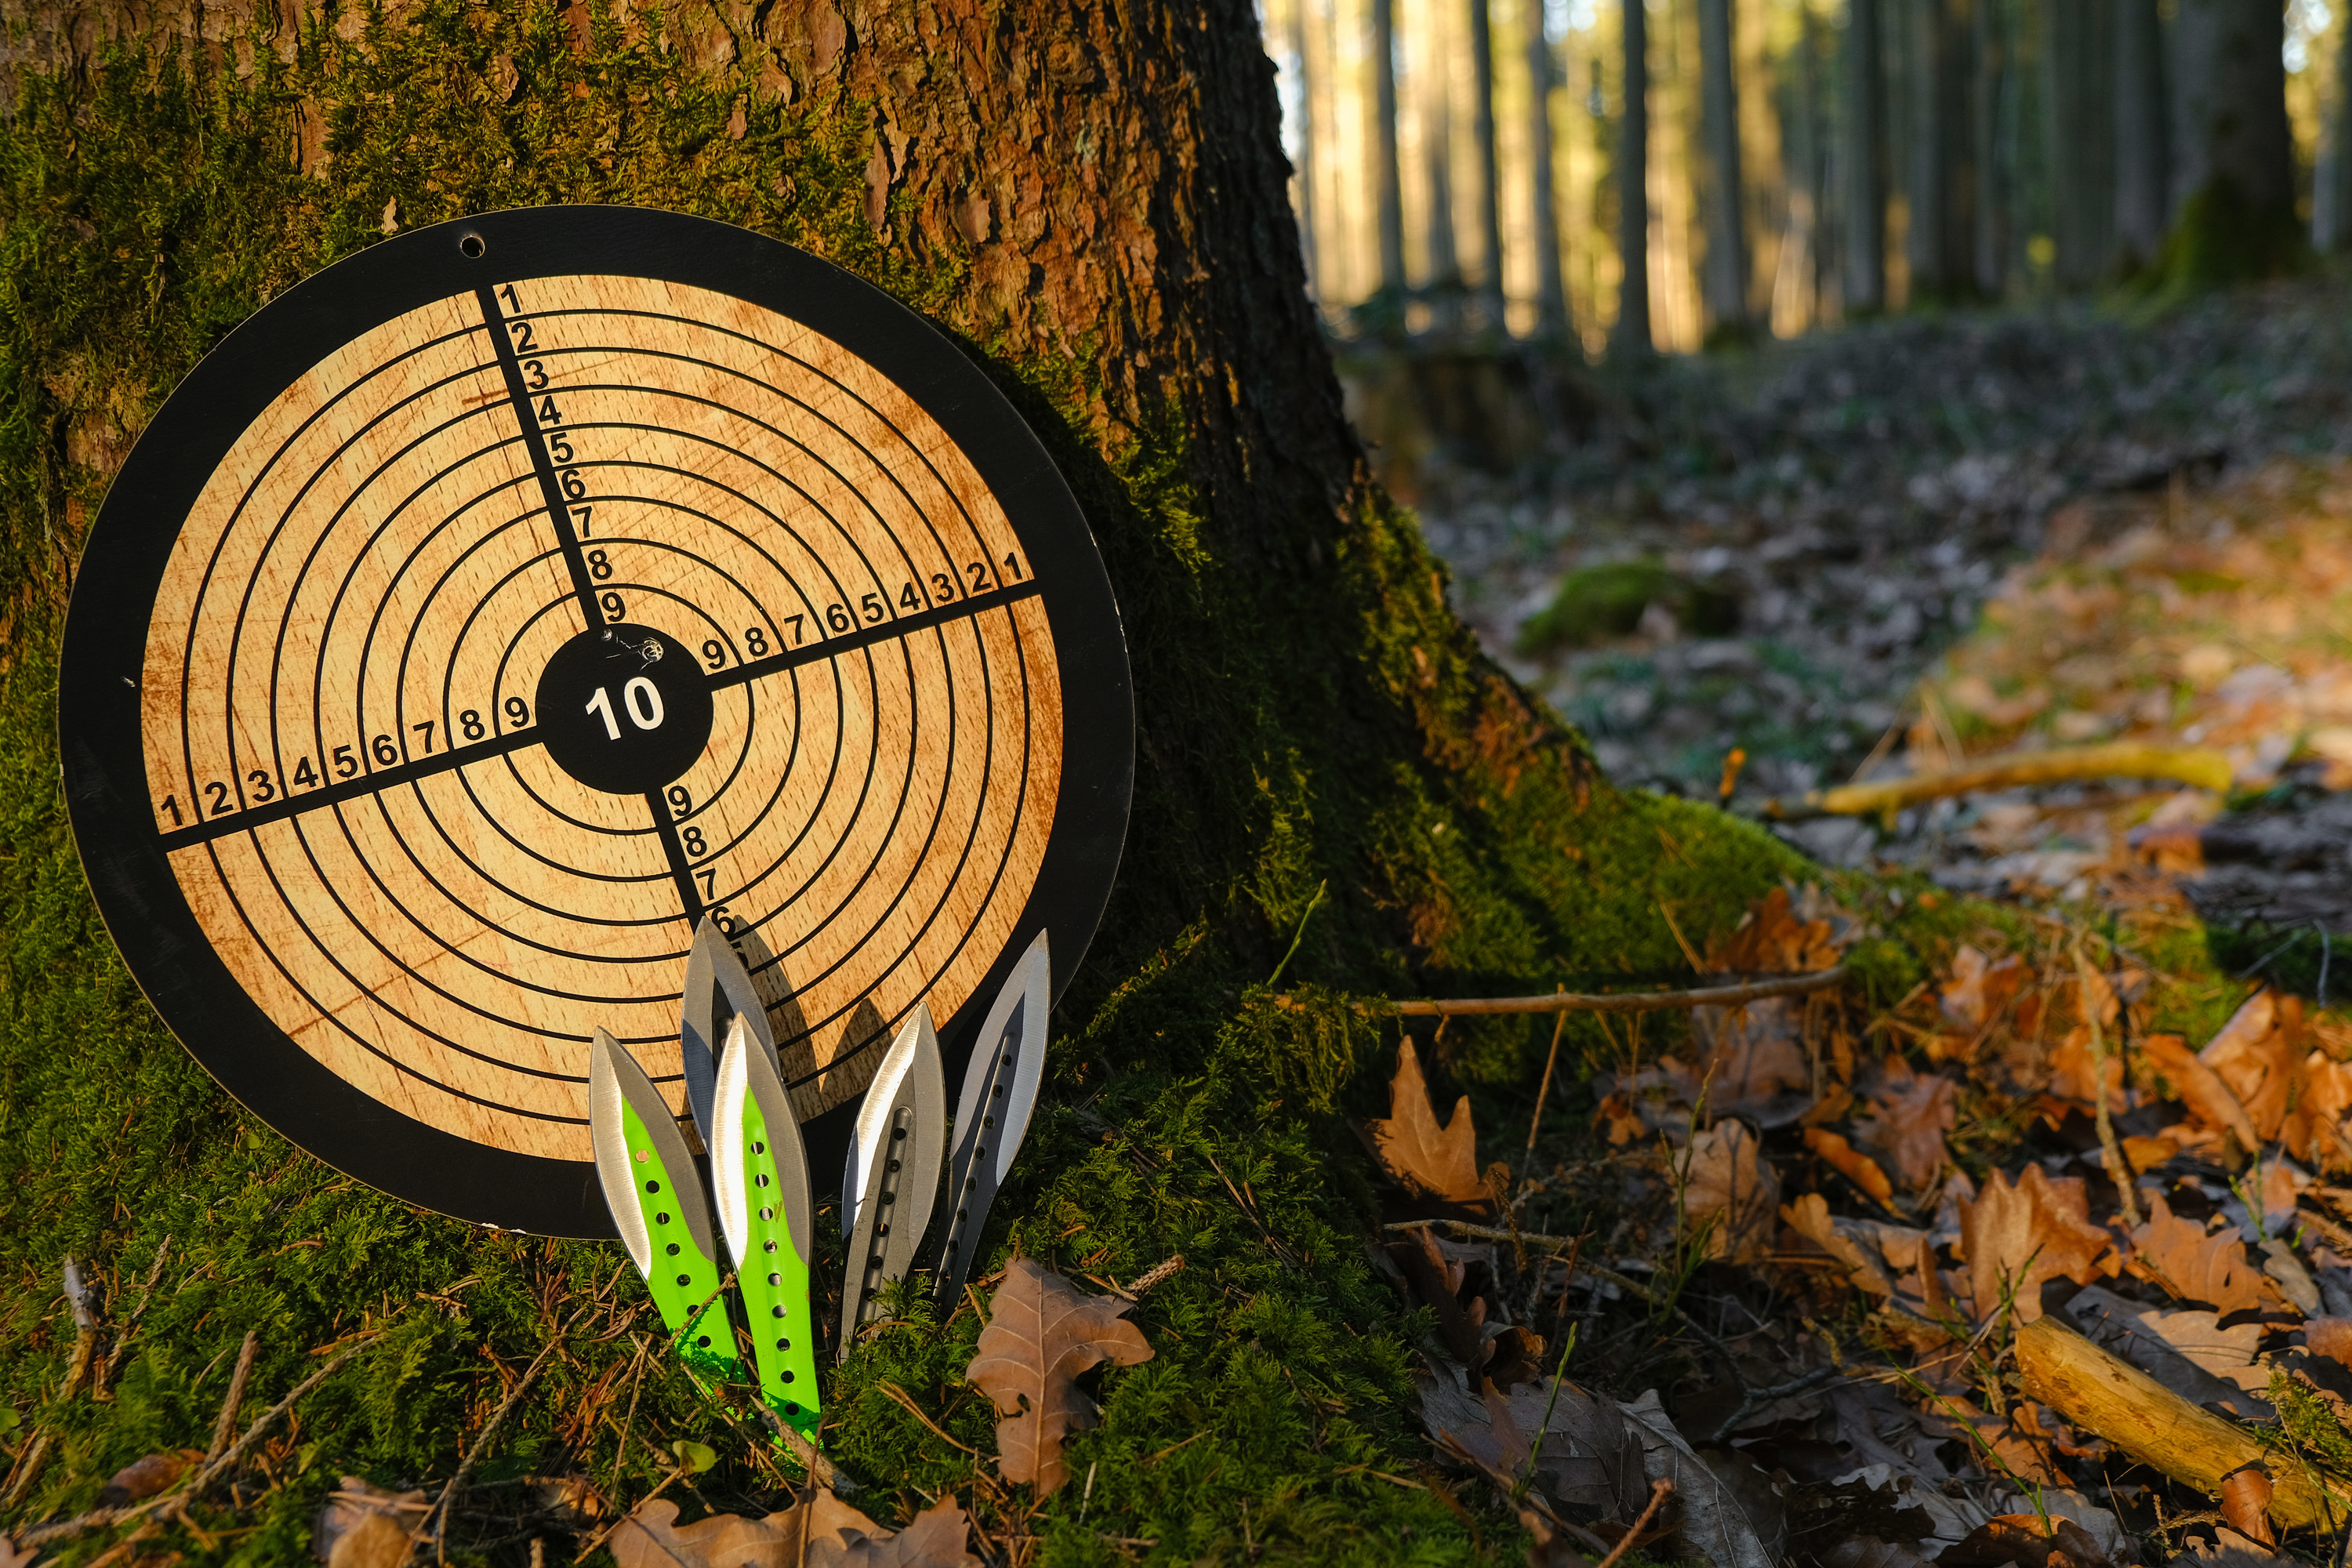 An image of a target board propped against a tree, with throwing knives in front of it